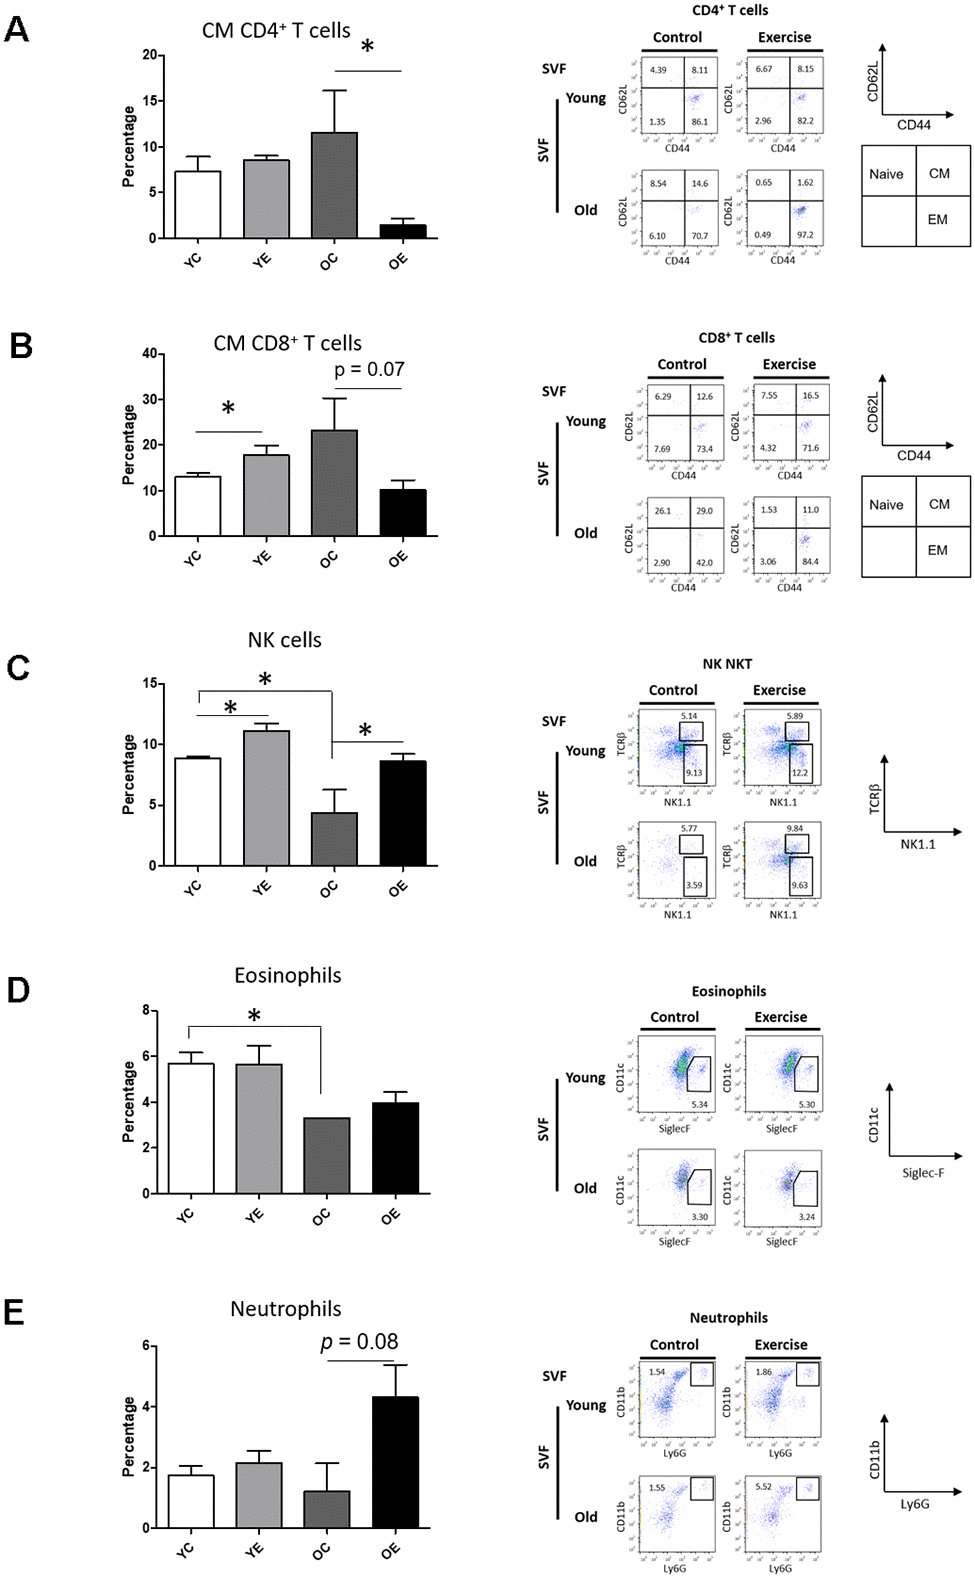 Effect of exercise on Immune cell profiling in SVF and spleen of young and aged mice. Bar graph and dot plots depict the frequencies of central memory (CM, CD62L+CD44+) CD4+ T cells (A); the frequencies of CM CD8+ T cells (B); the frequencies of NK (NK1.1+TCRβ-) cells (C); the frequencies of eosinophils (F4/80+Siglec-F+) (D); and the frequencies of neutrophils (F4/80-CD11c-CD11b+Ly6G+) (E) in SVF.